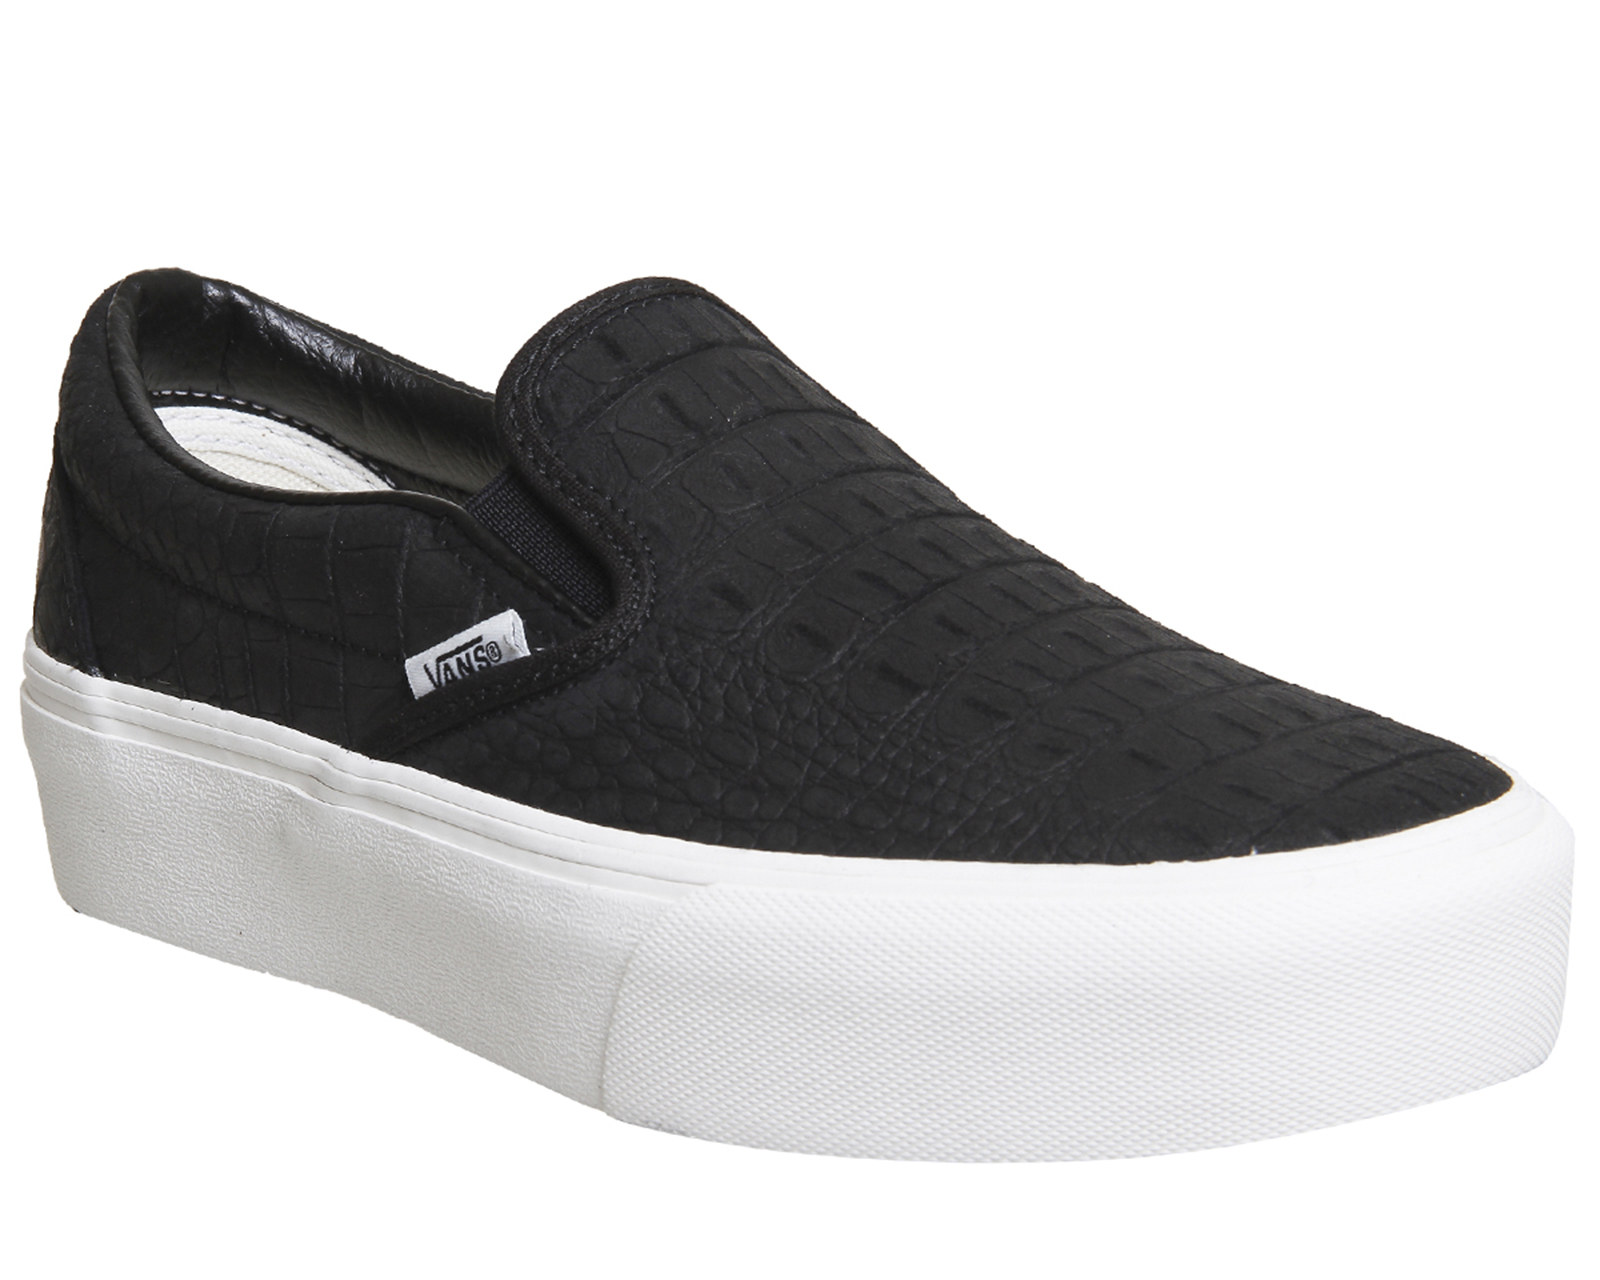 black and white slip on trainers